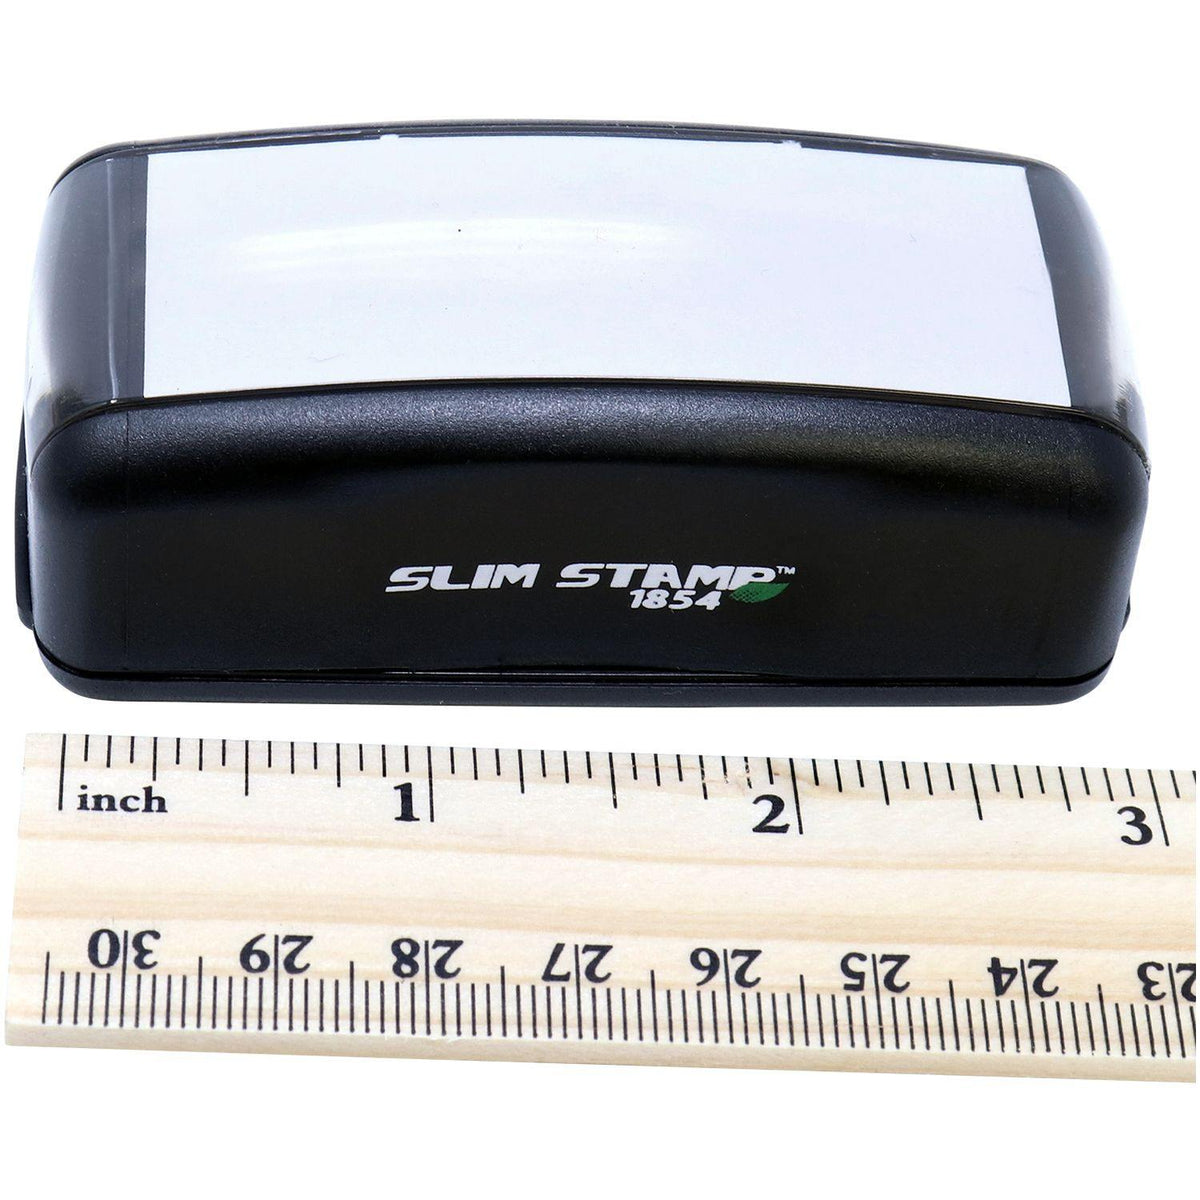 Measurement Large Pre-Inked Standard Mail Stacked Stamp with Ruler